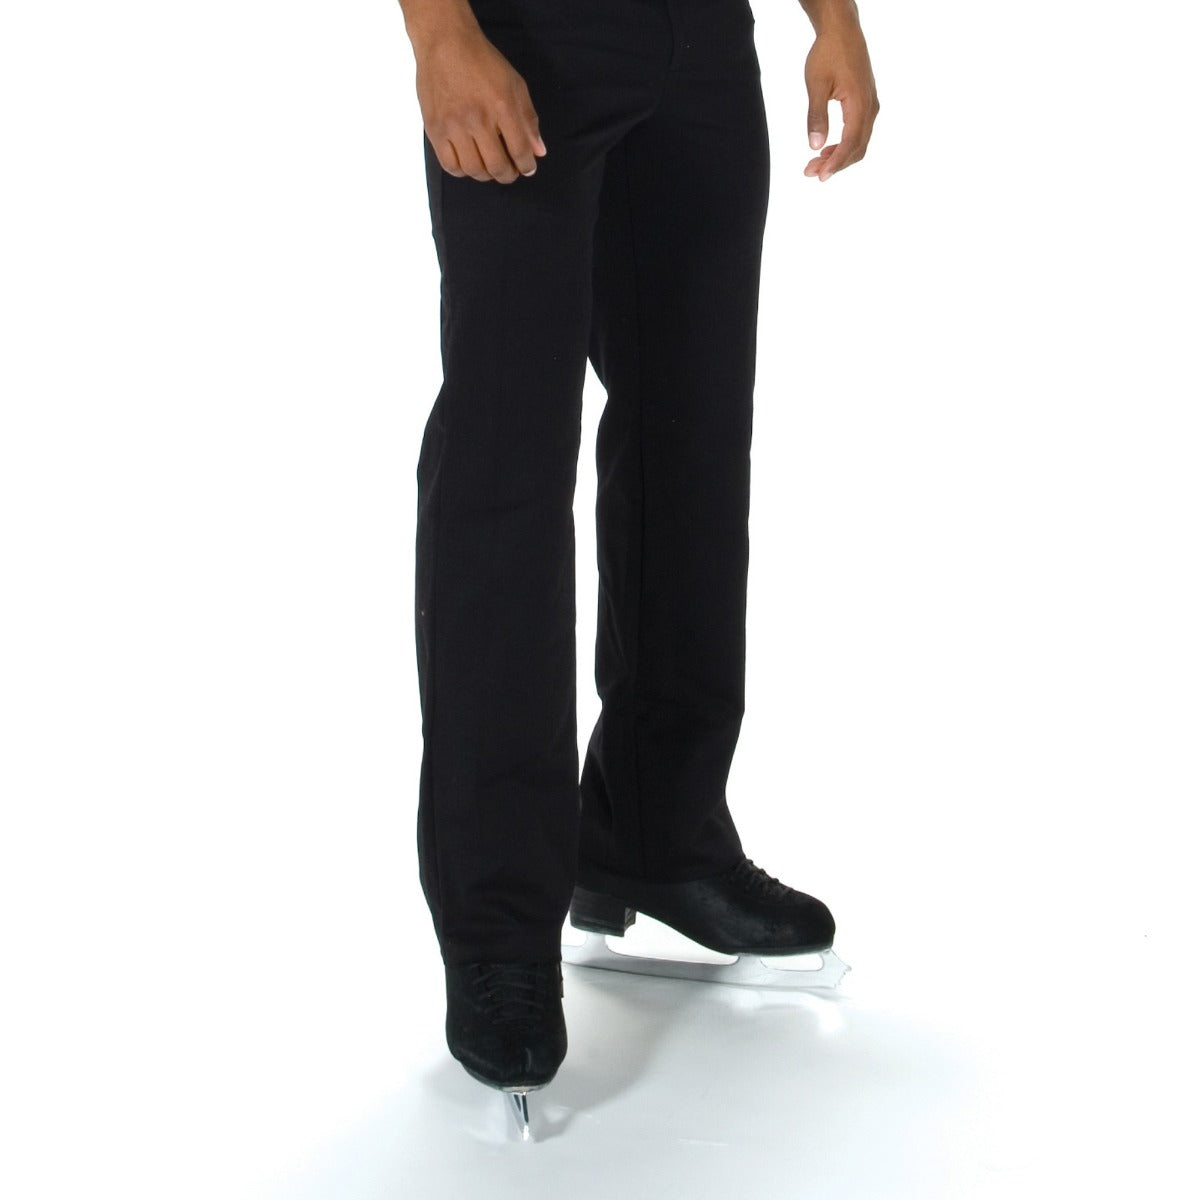 805 Mens Flat Front Skating Pants in Black by Jerry's